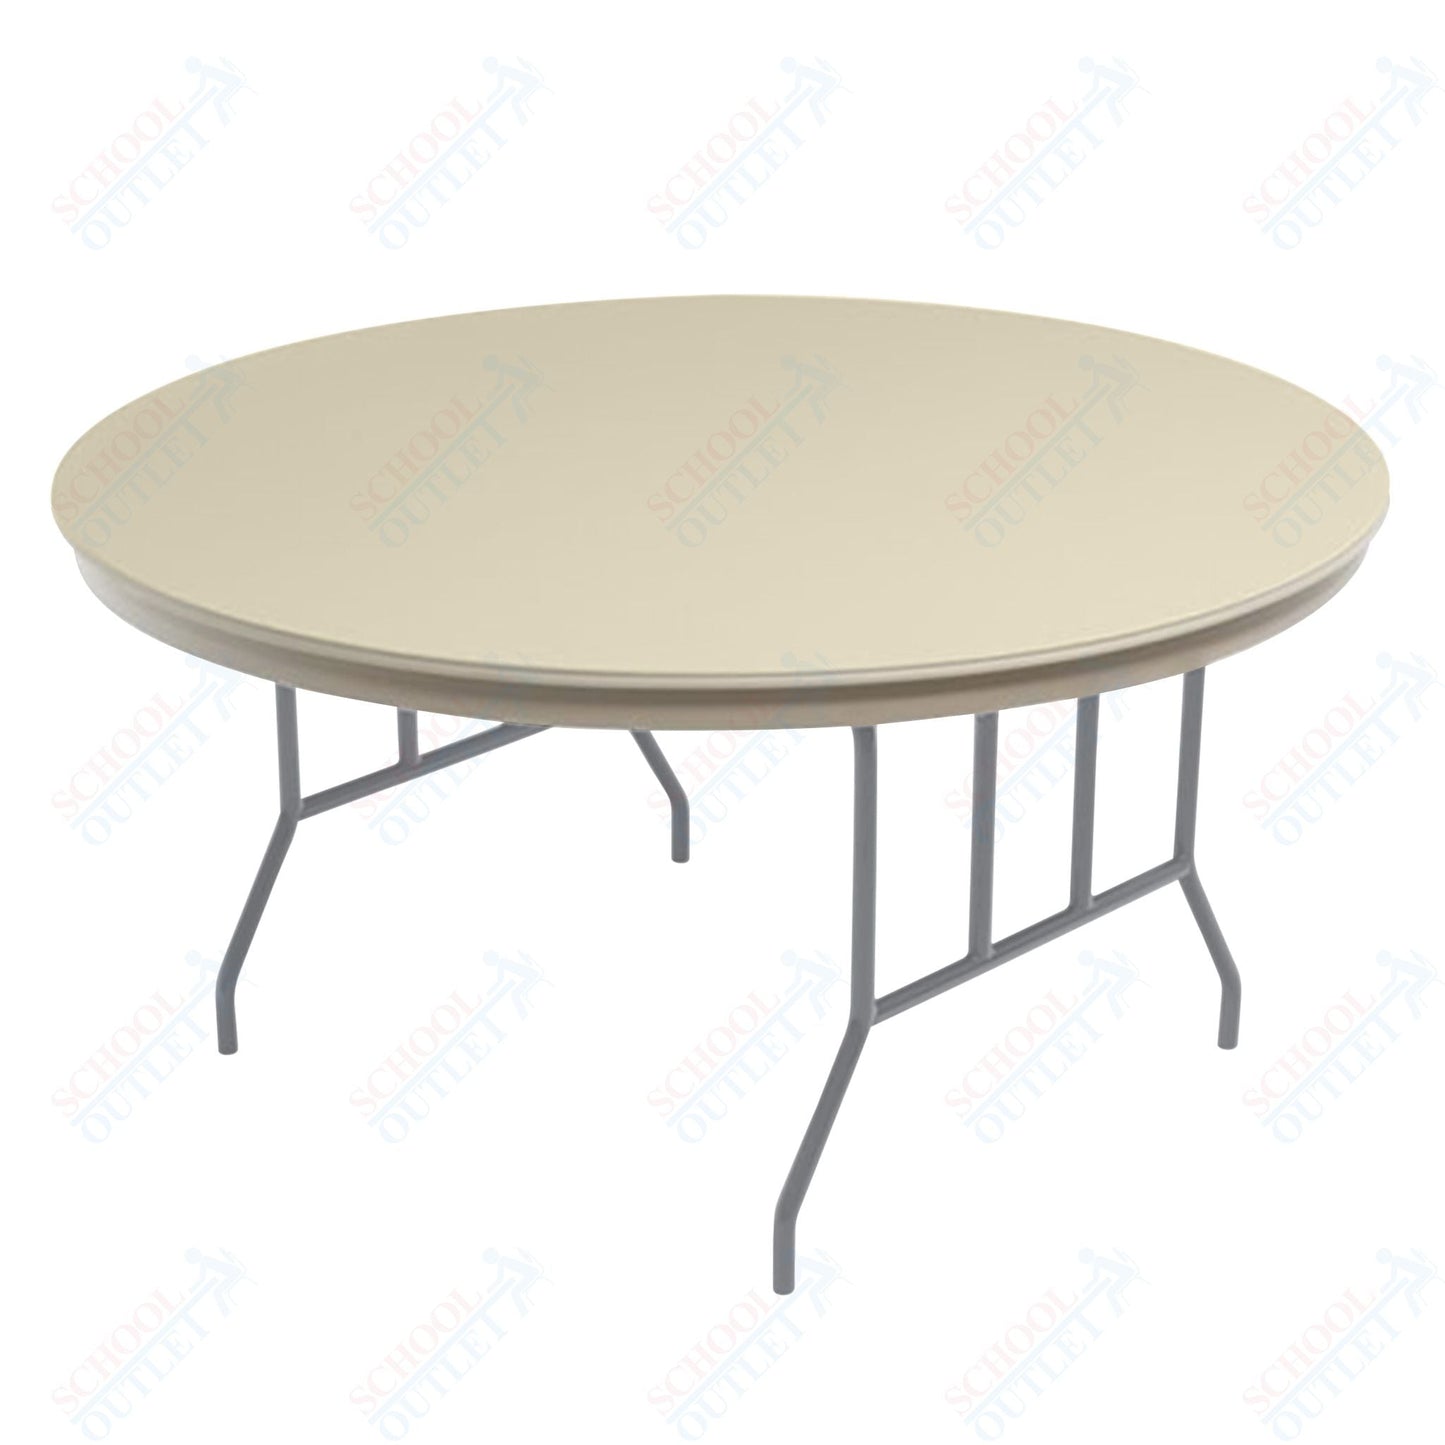 AmTab Dynalite Featherweight Heavy - Duty ABS Plastic Folding Table - Round - 30" Diameter x 29"H (AmTab AMT - R30DL) - SchoolOutlet